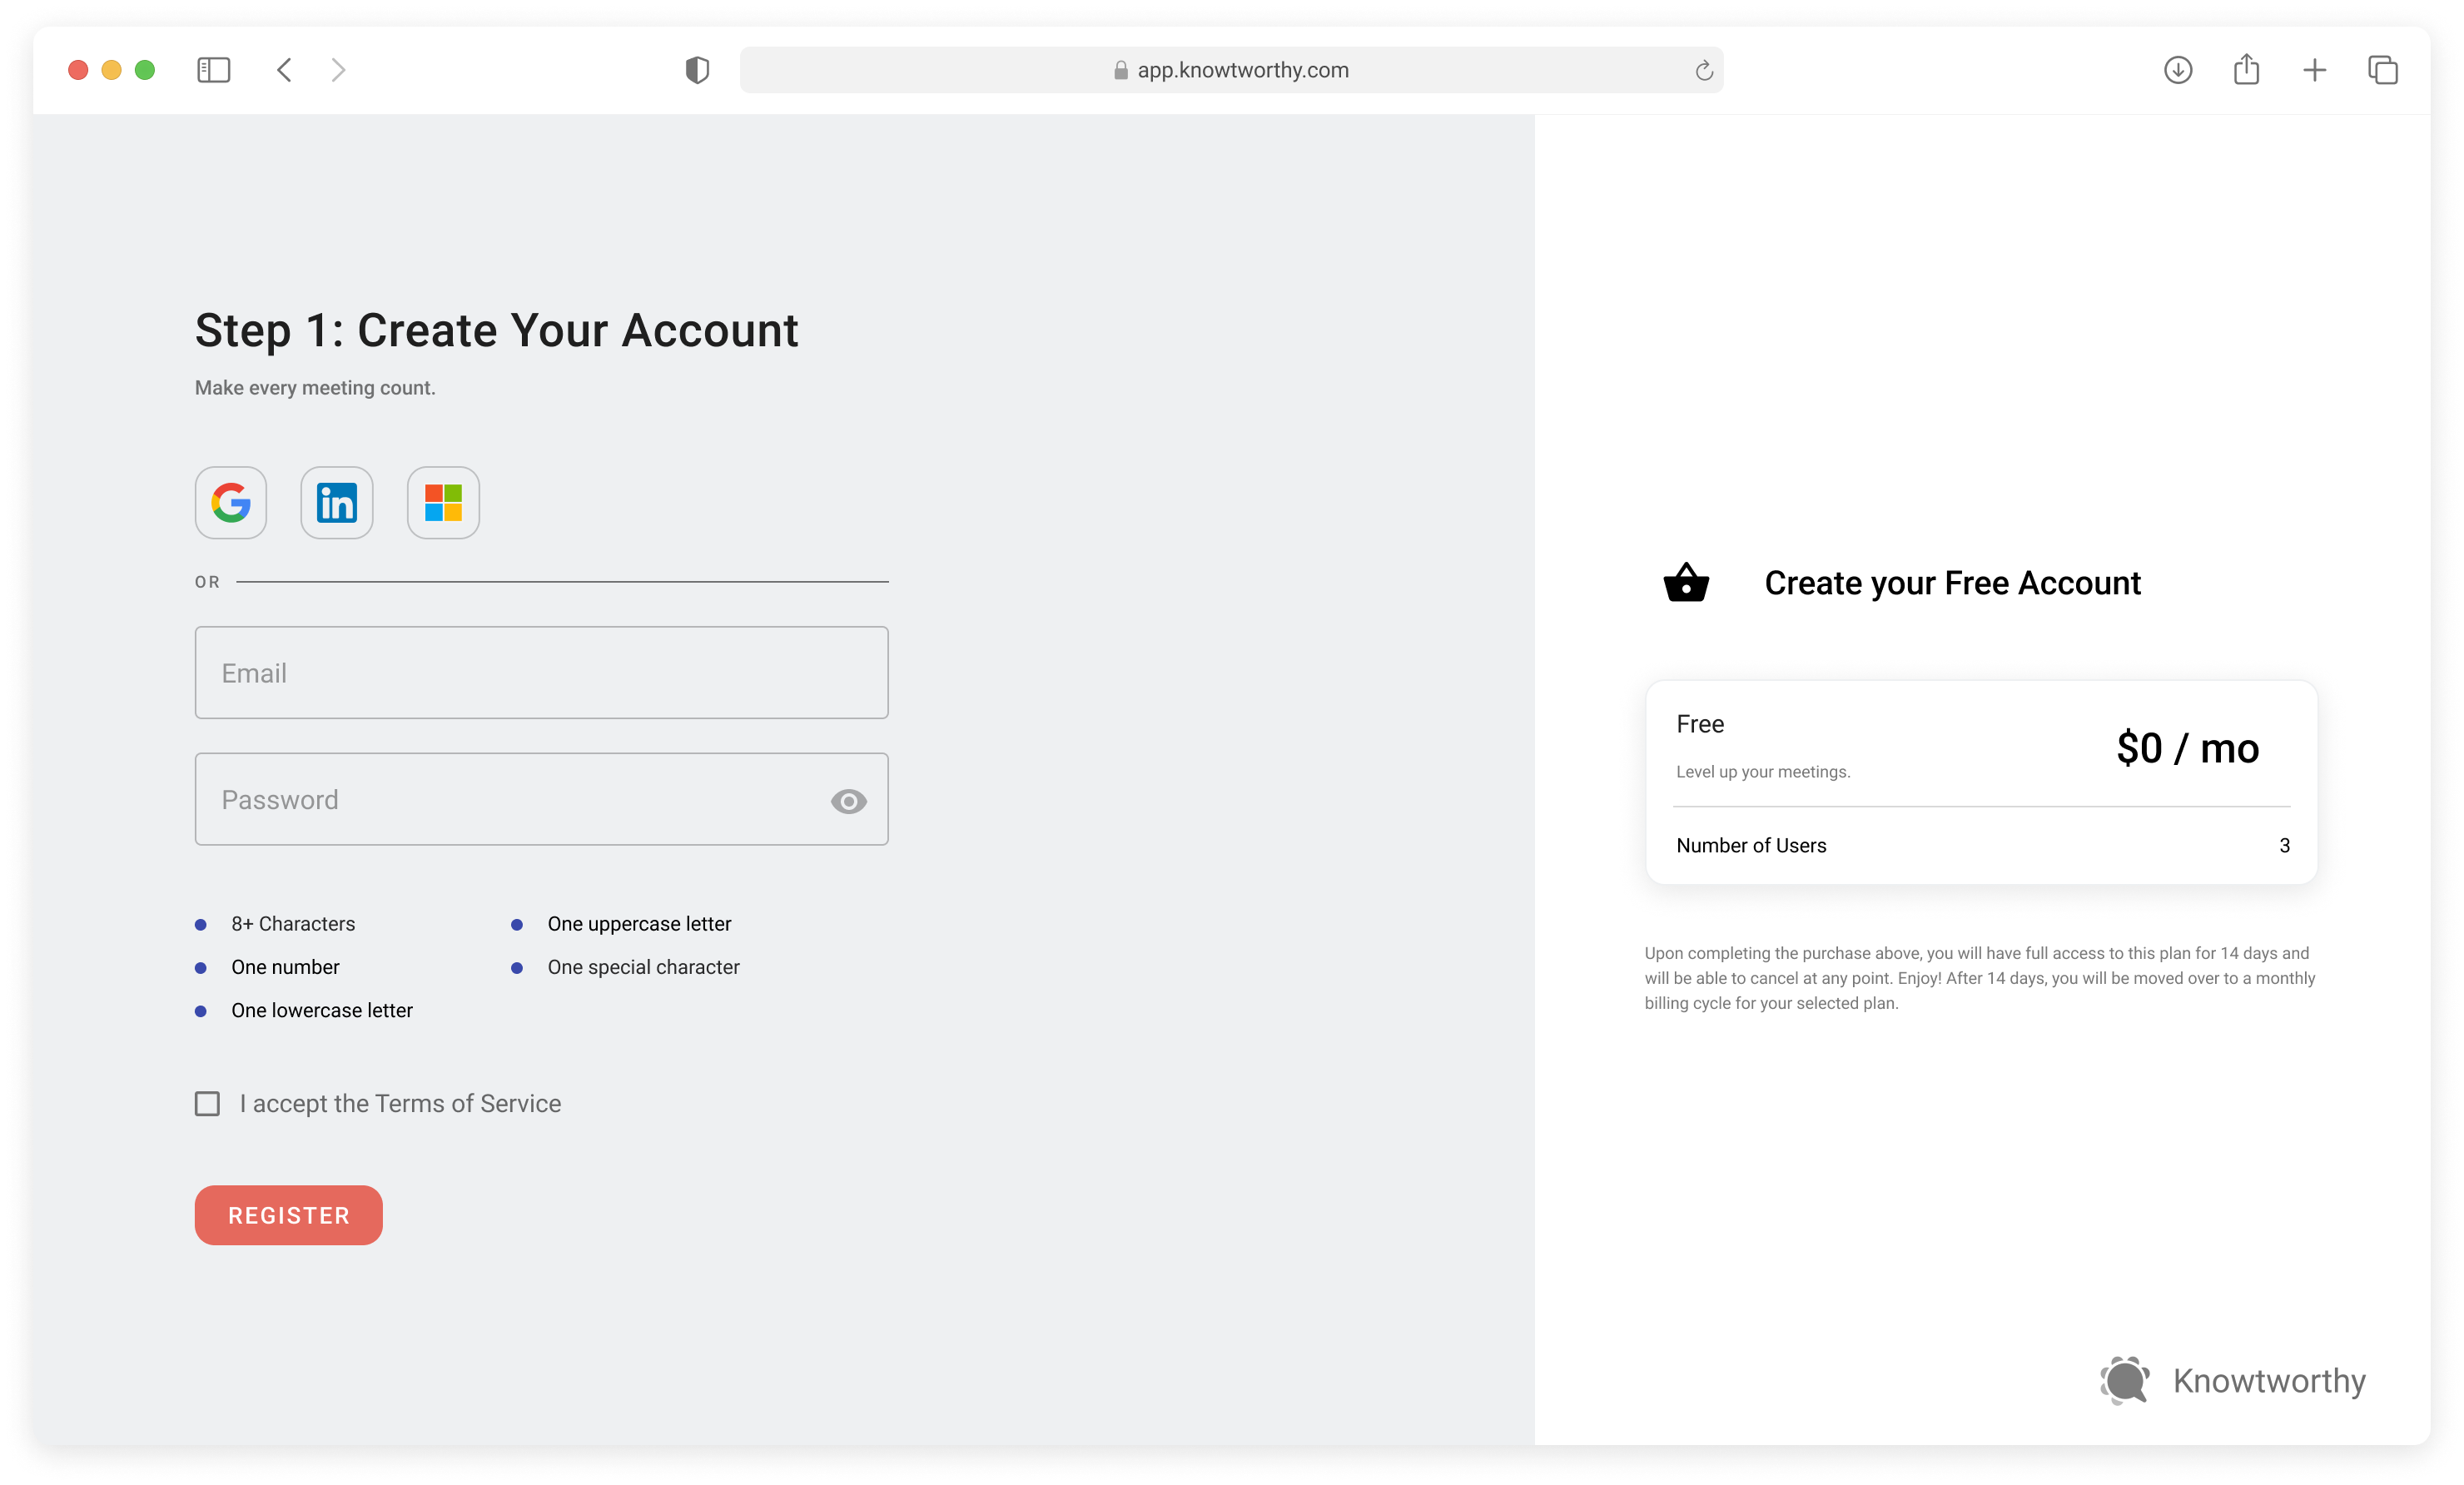 Using Social Login to Access your Knowtworthy Account